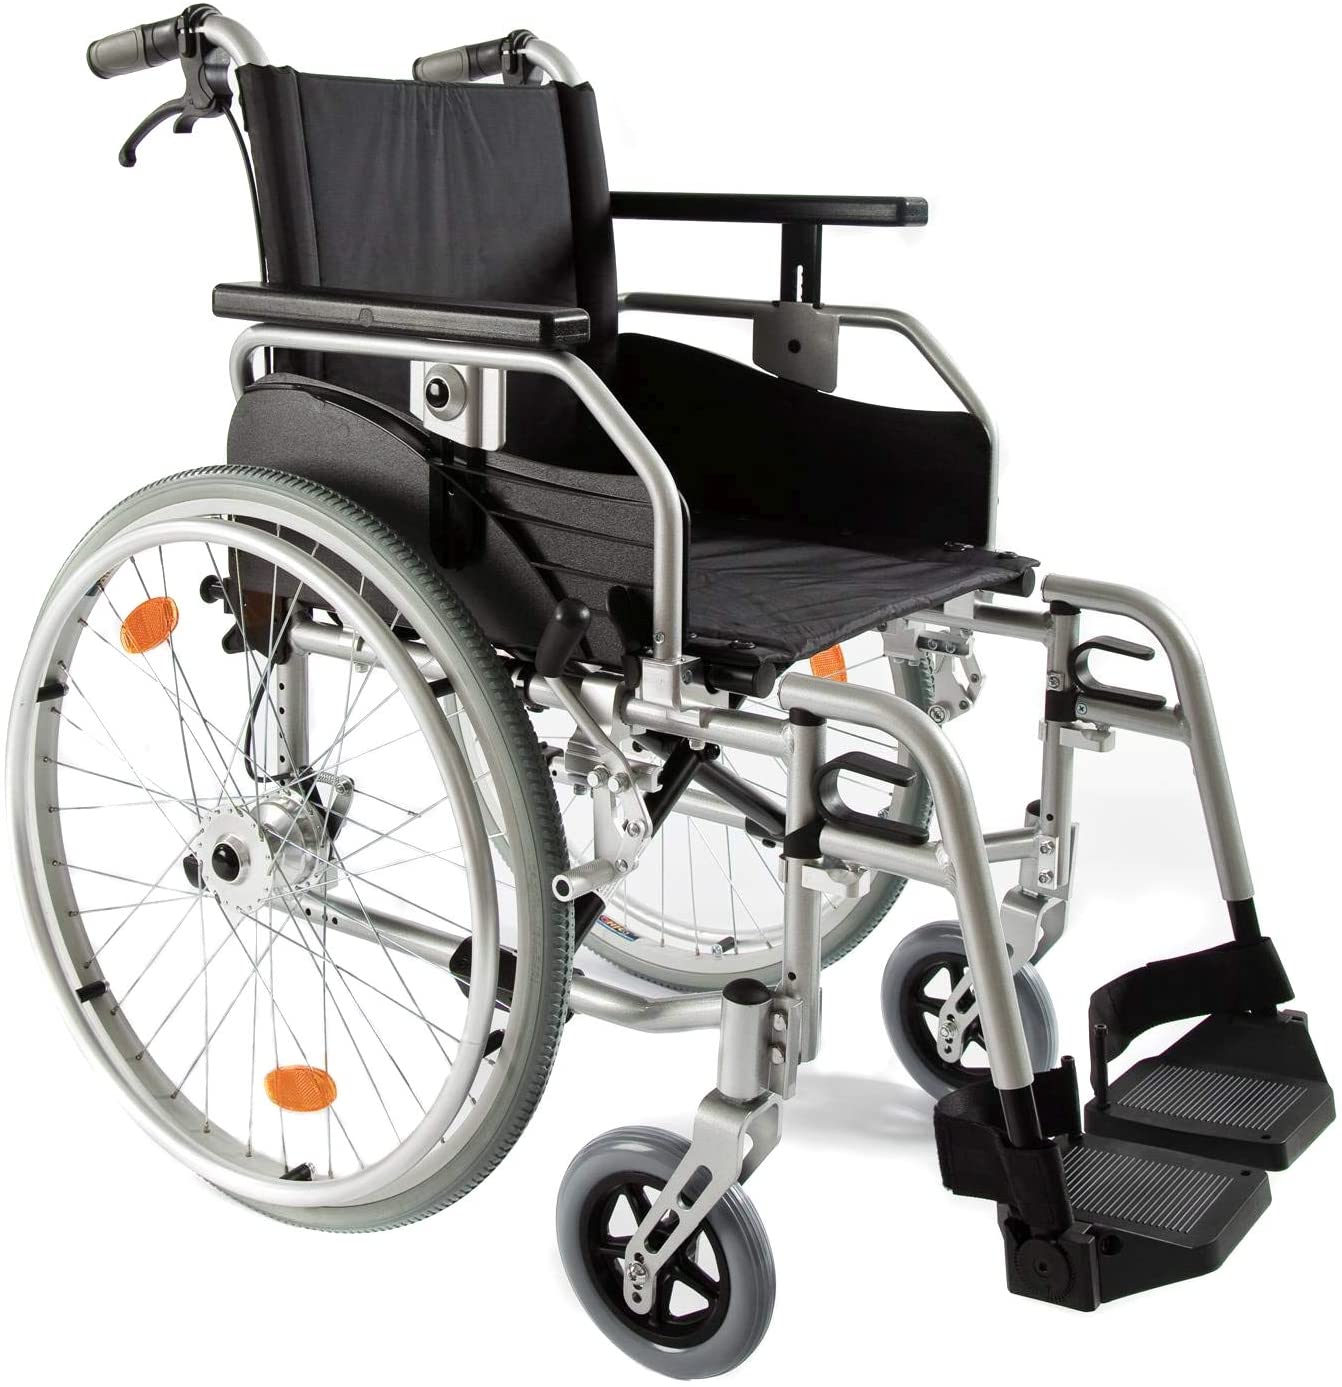 Bescomedical Primus Ml 2.0 Wheelchair With Comfort Package, Foldable, Light